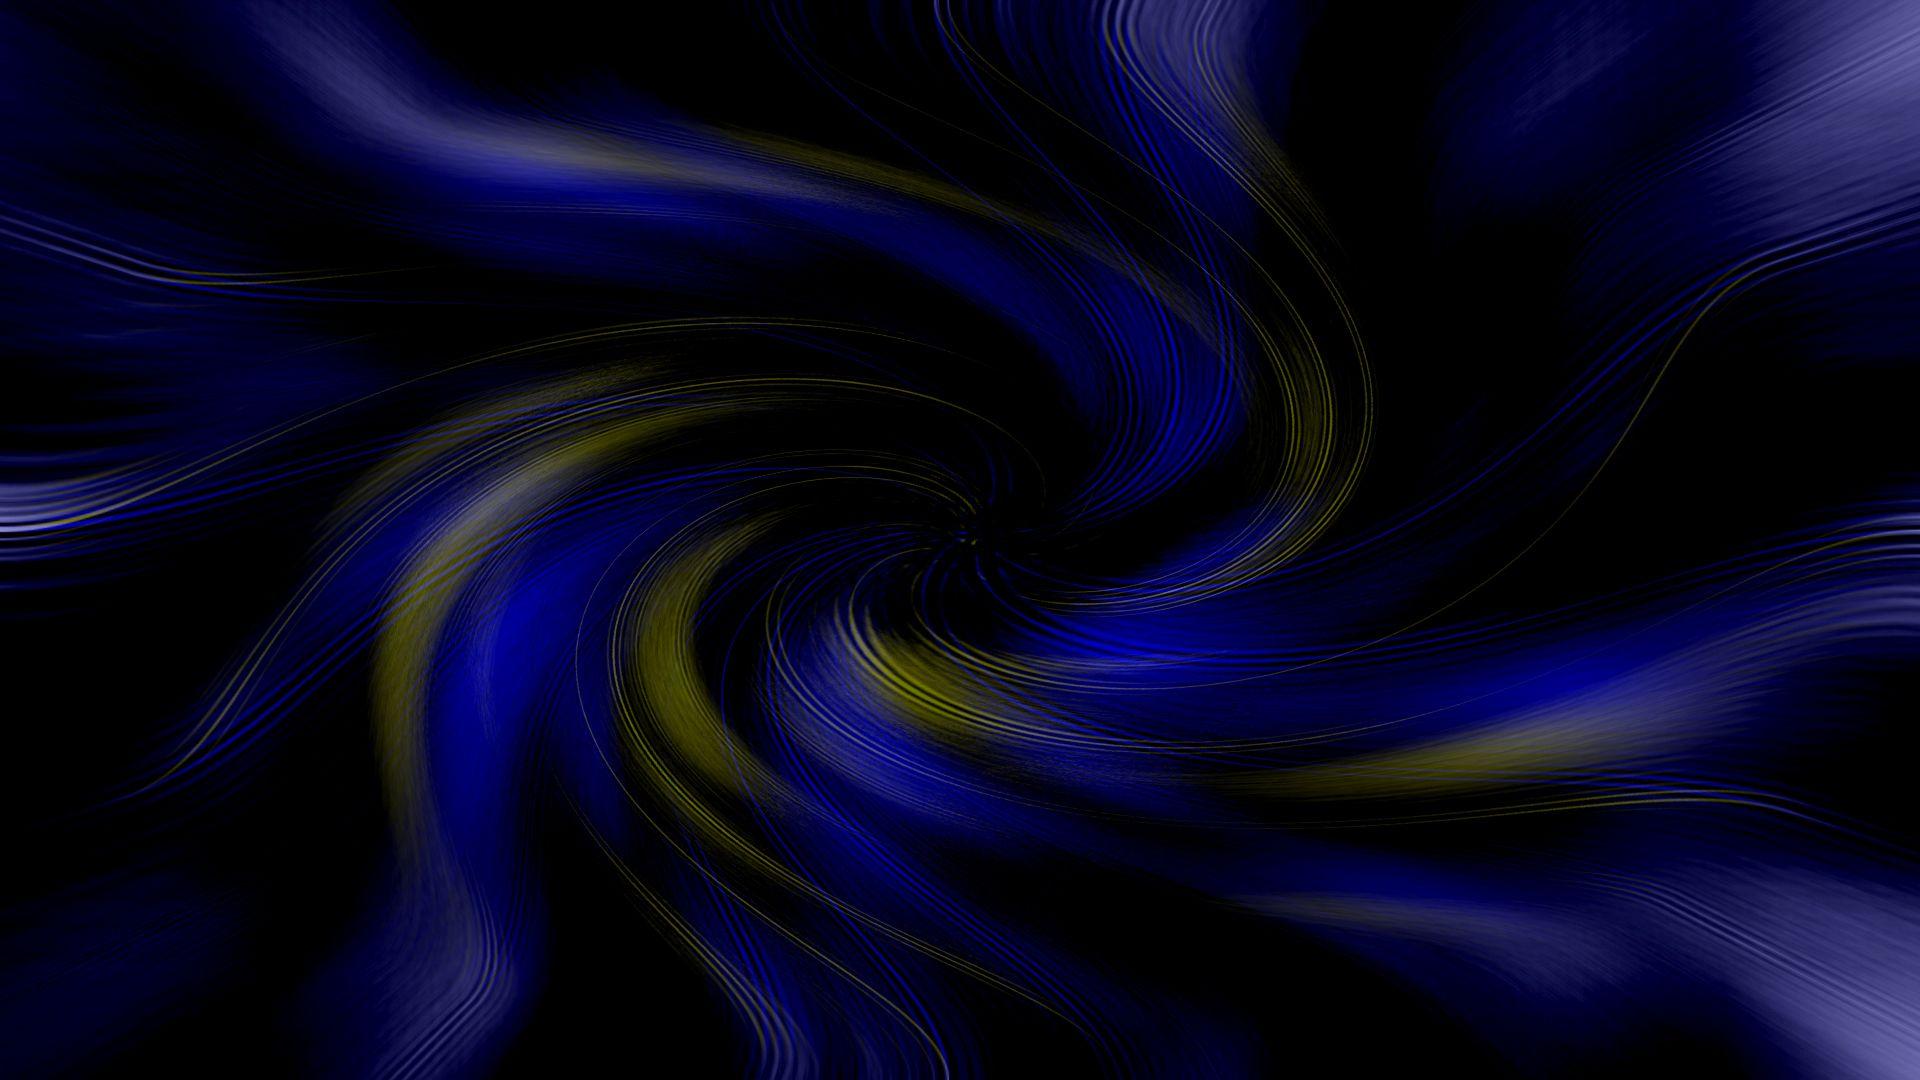 Wallpaper.wiki Blue And Gold Wallpaper Free Download PIC WPB003853